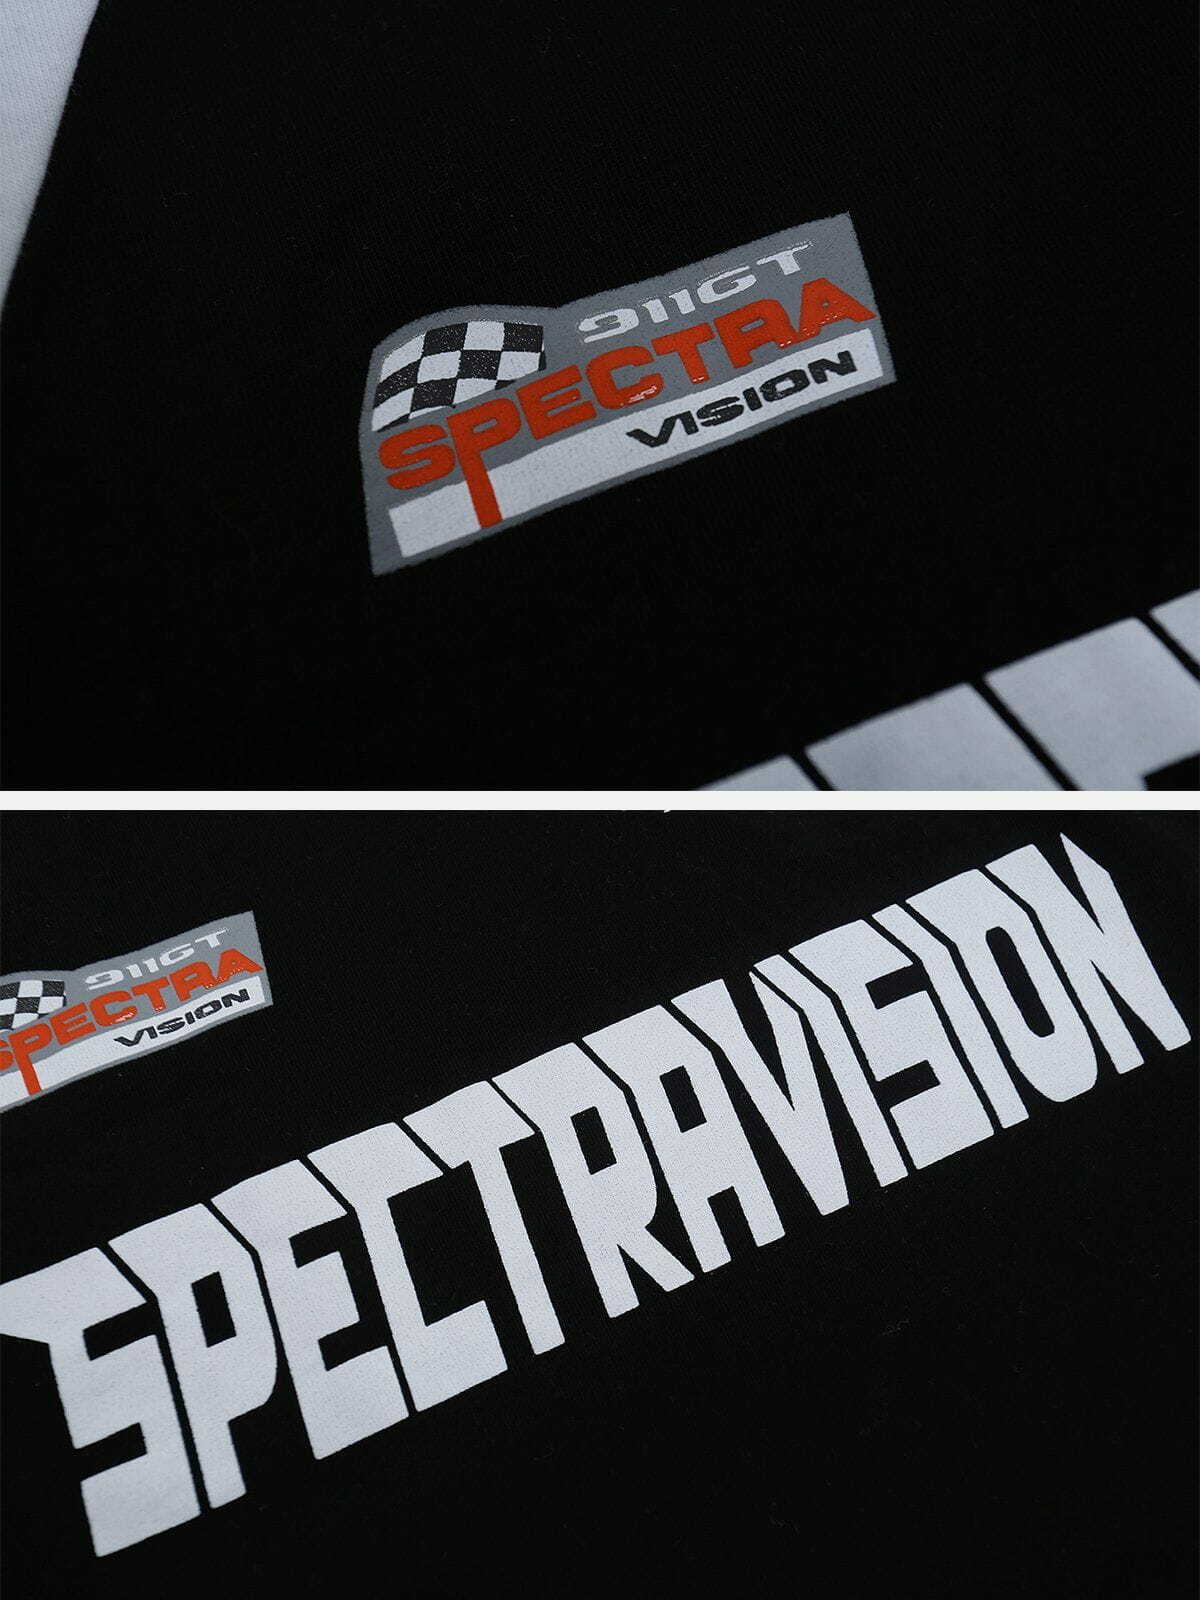 vibrant retro racing tee edgy and youthful streetwear 8705